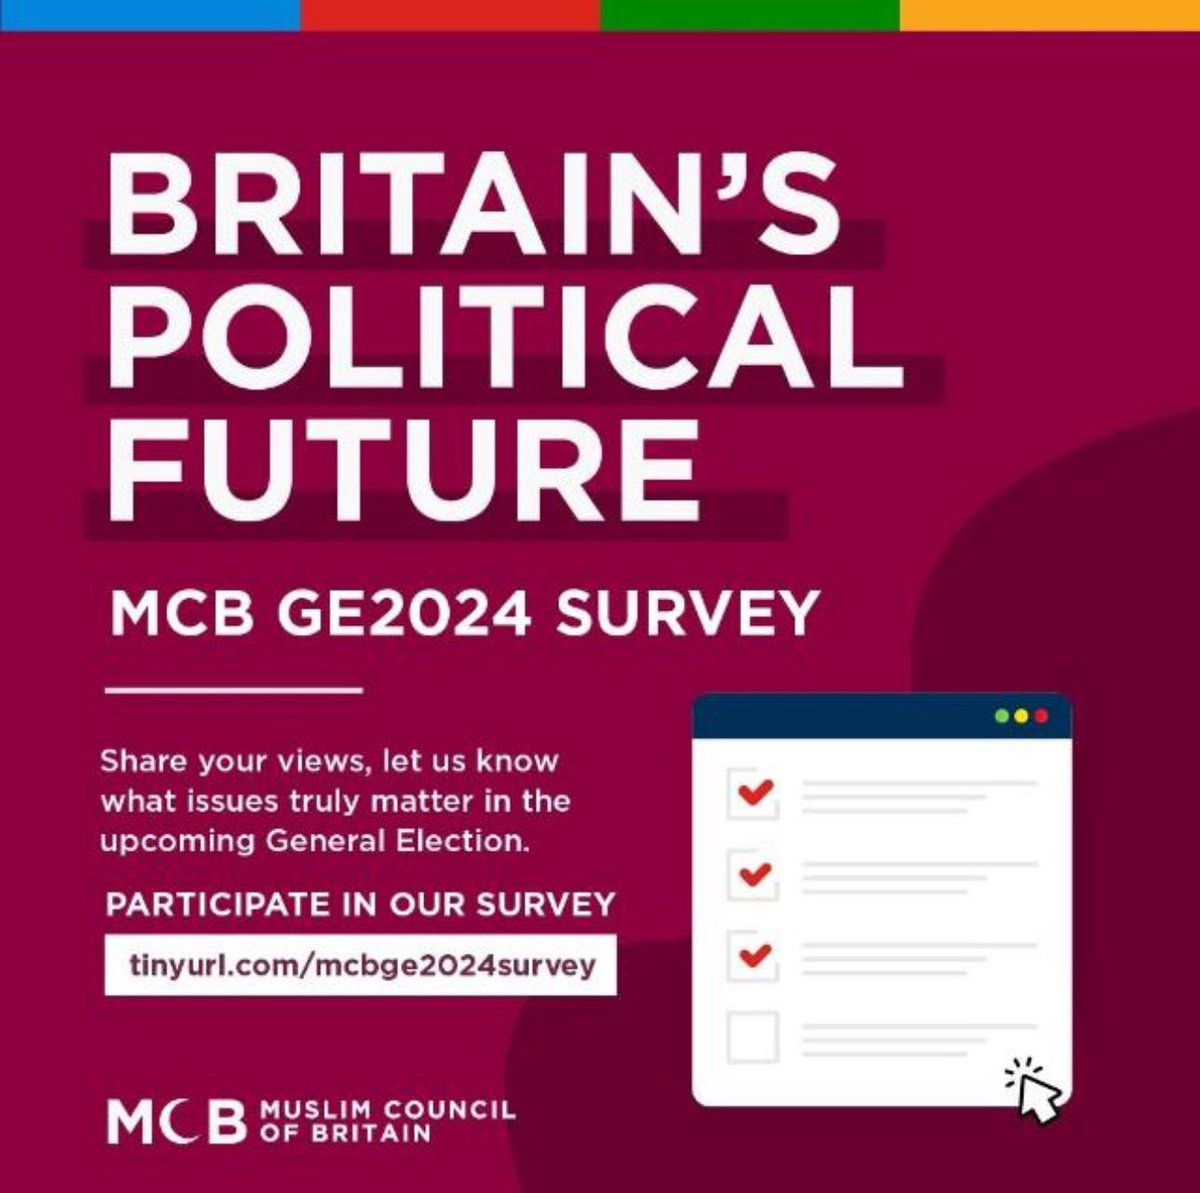 📢 Haven’t filled in our MCB GE2024 Survey yet? 🗳️ Now’s your chance to make your voice heard and shape our policy pledges! 🌟 Don’t miss out - fill it out here: tinyurl.com/mcbge2024survey